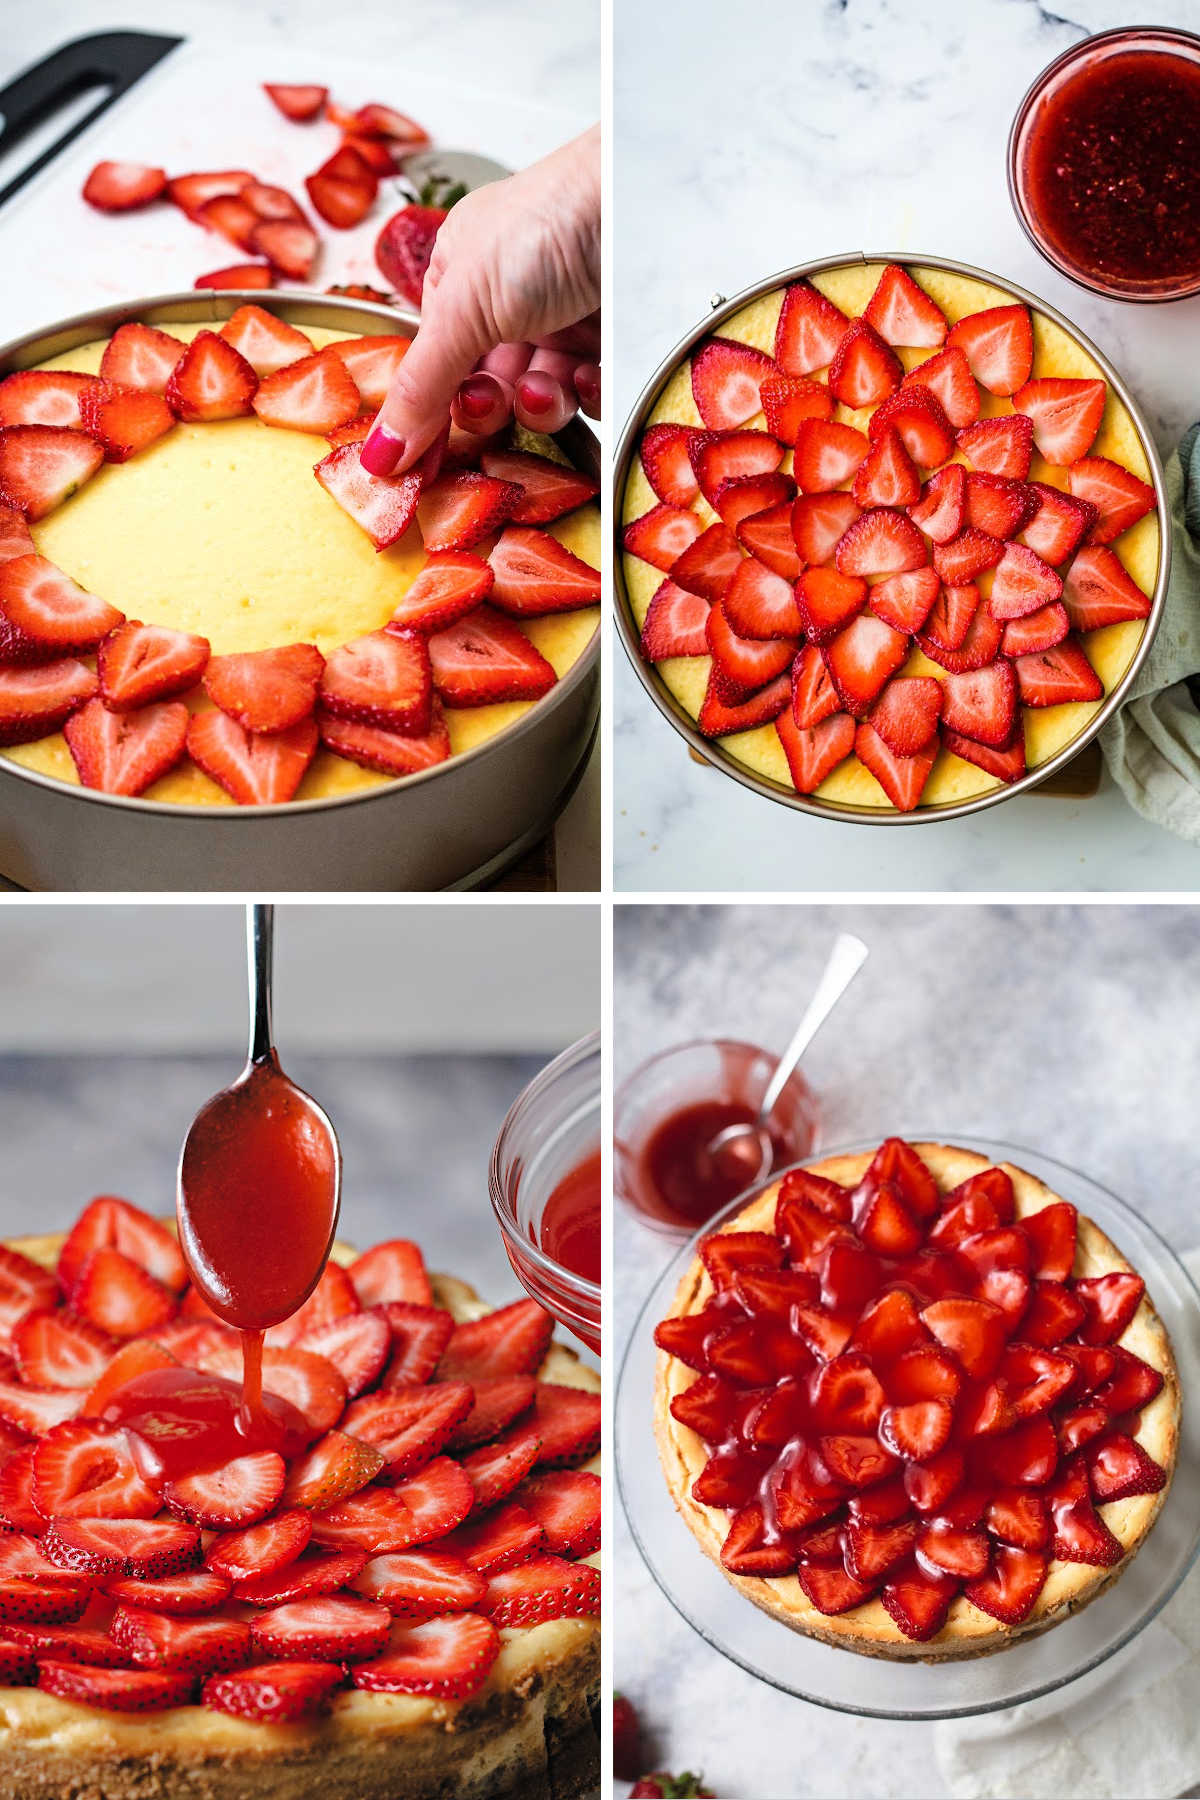 strawberry cheesecake assembly steps: arrange sliced strawberries on baked cheesecake; spoon strawberry gel on top of berries.